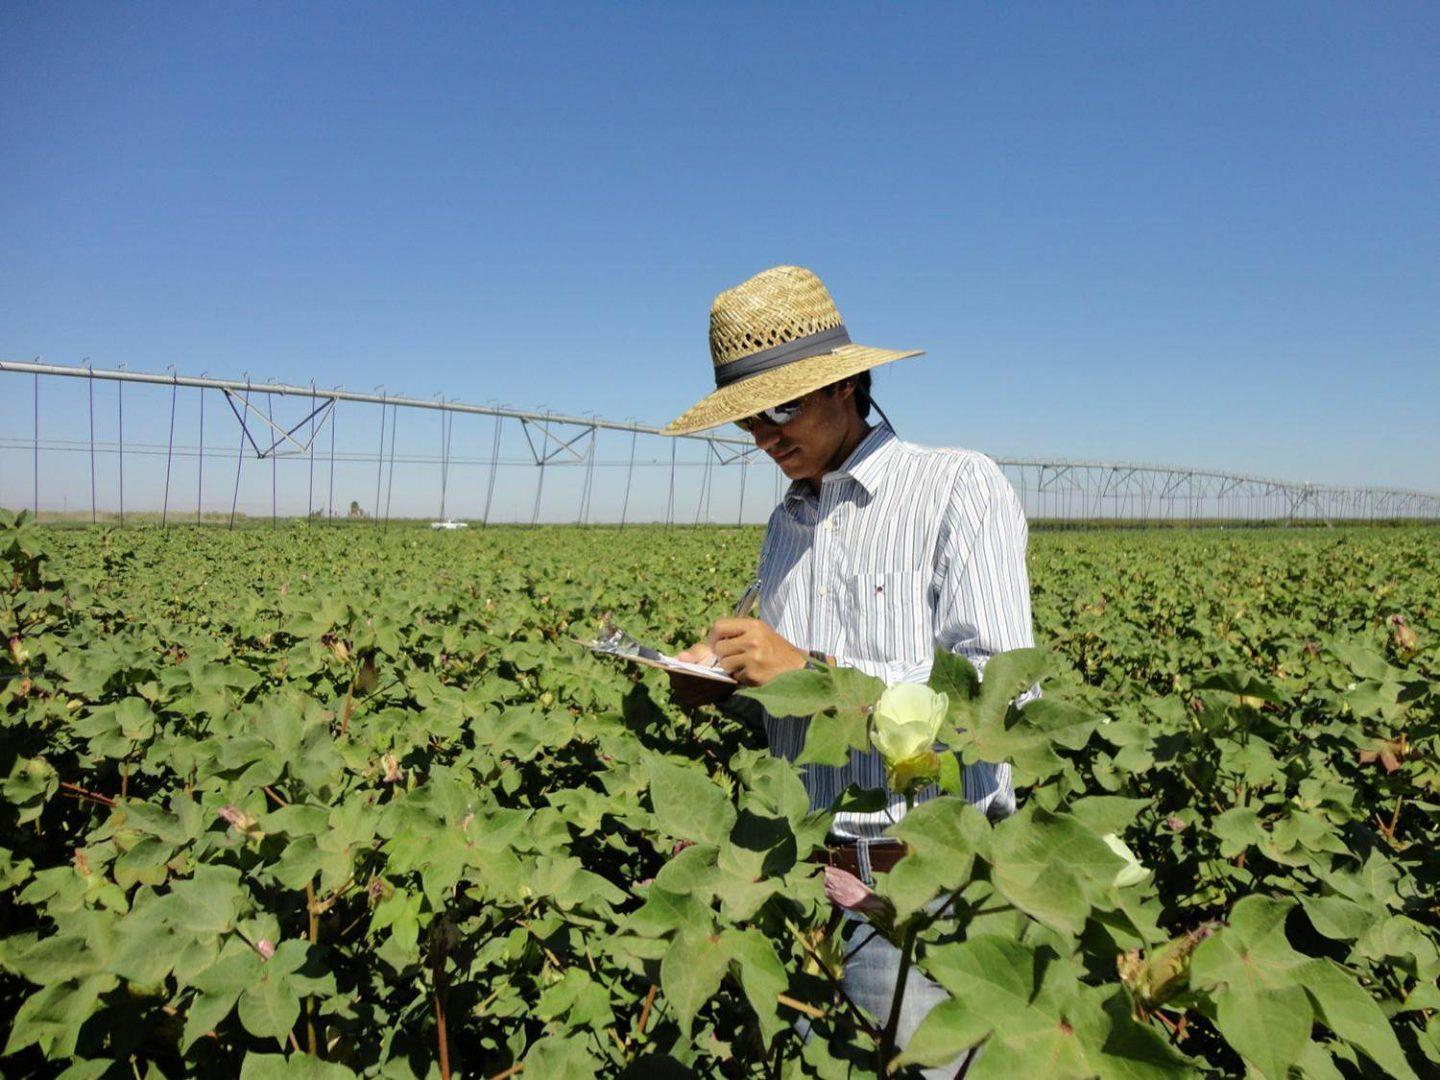 Photo courtesy of Dr. Sharon Benes

Caio Diaz, an undergraduate research intern from Brazil, helps a graduate student gather data for their thesis research on conservation agriculture systems for cotton production.